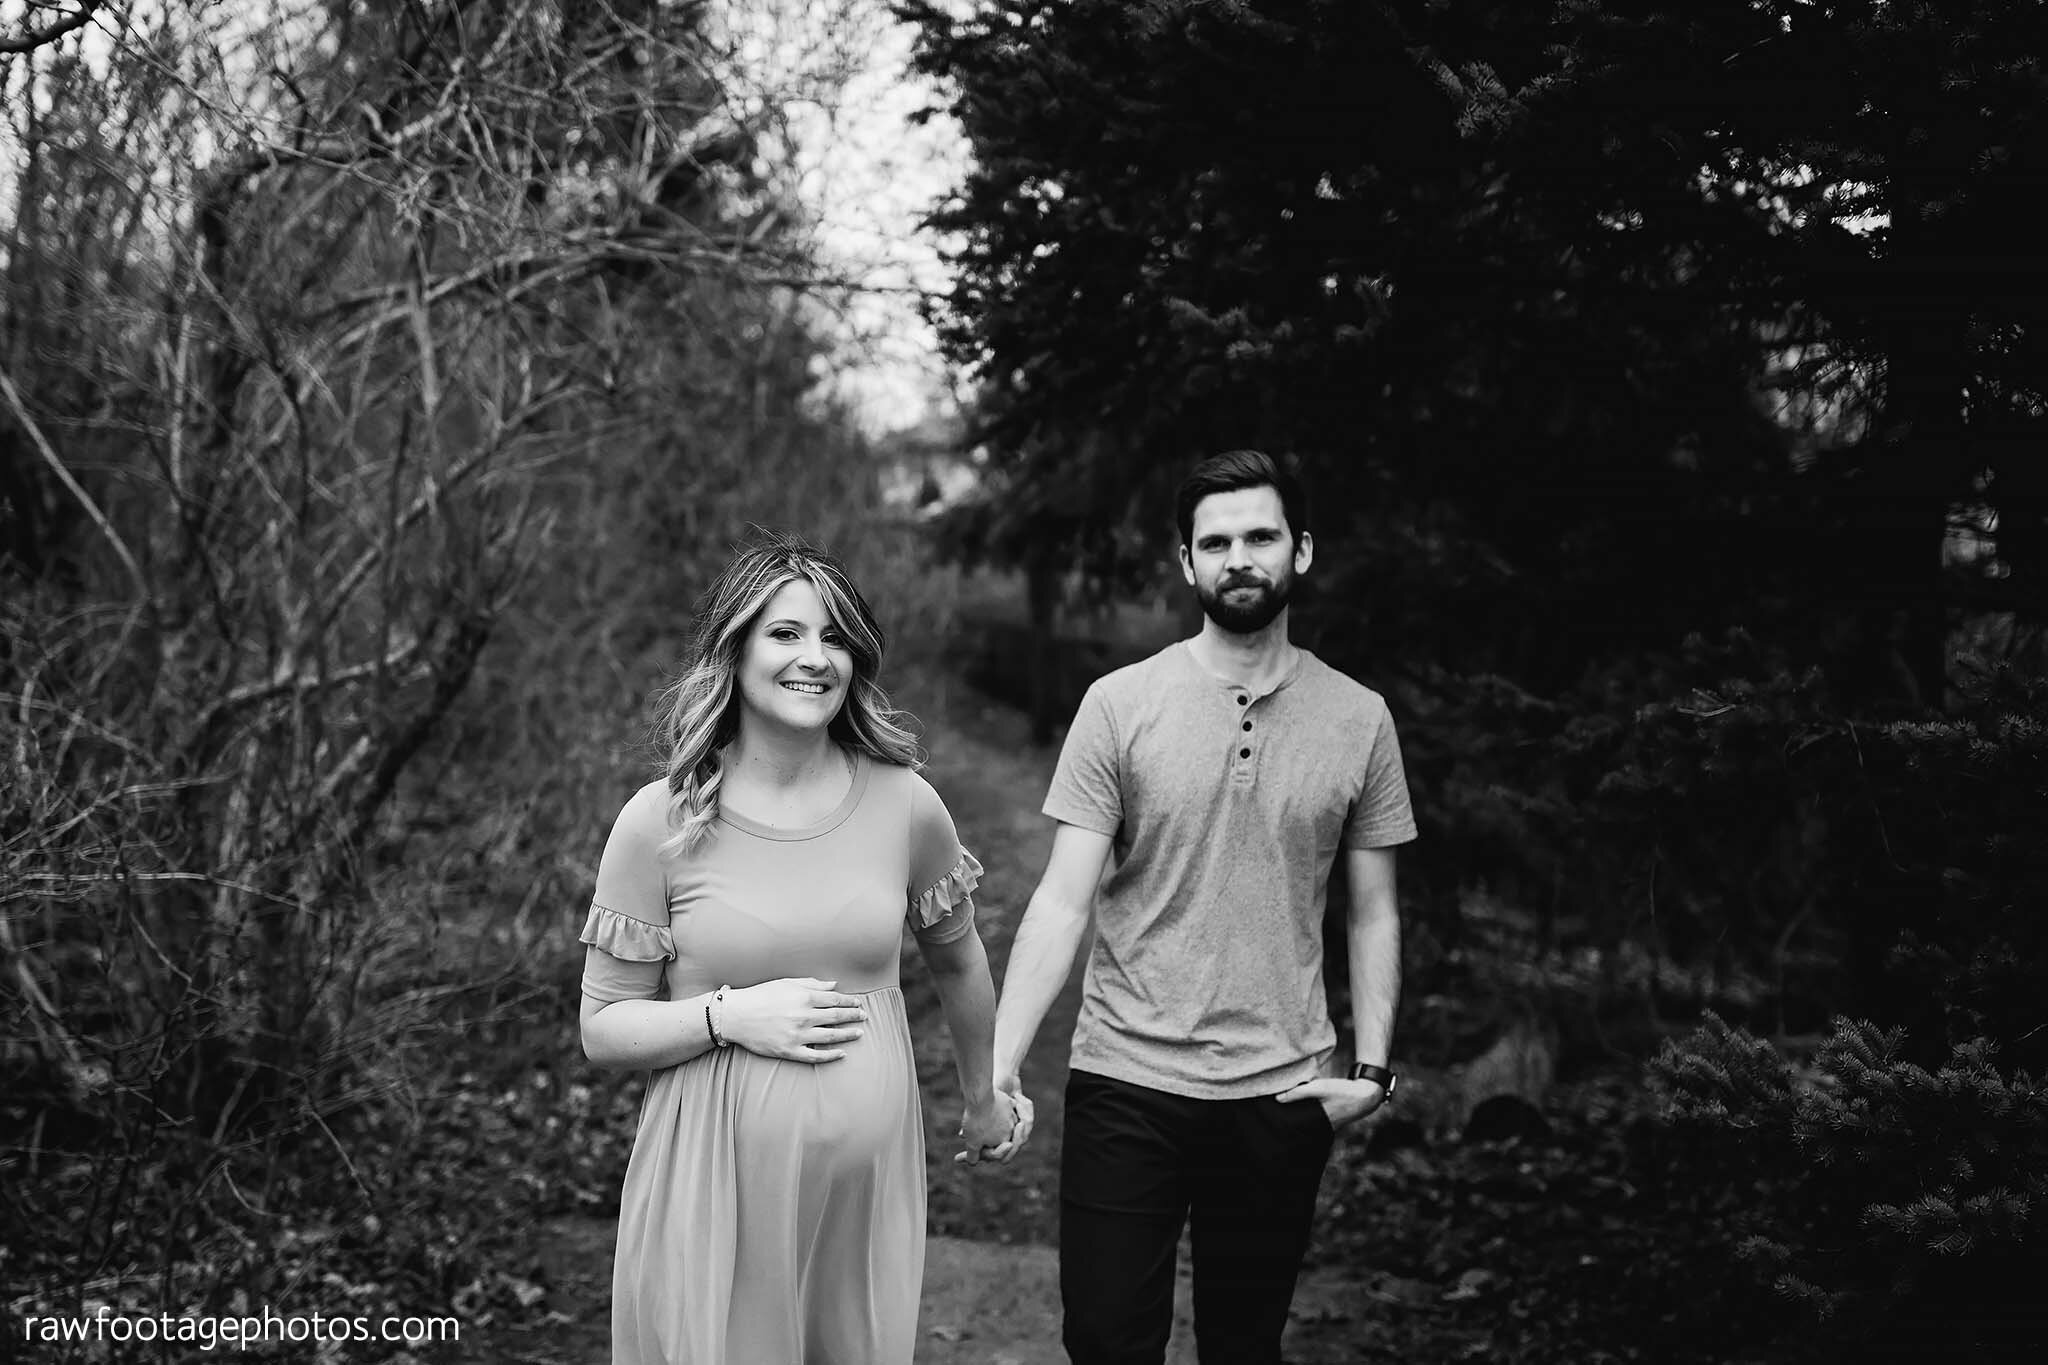 london_ontario_maternity_photographer-raw_footage_photography-in_home_lifestyle_maternity-forest_maternity_session-yellow_maternity_dress_027.jpg